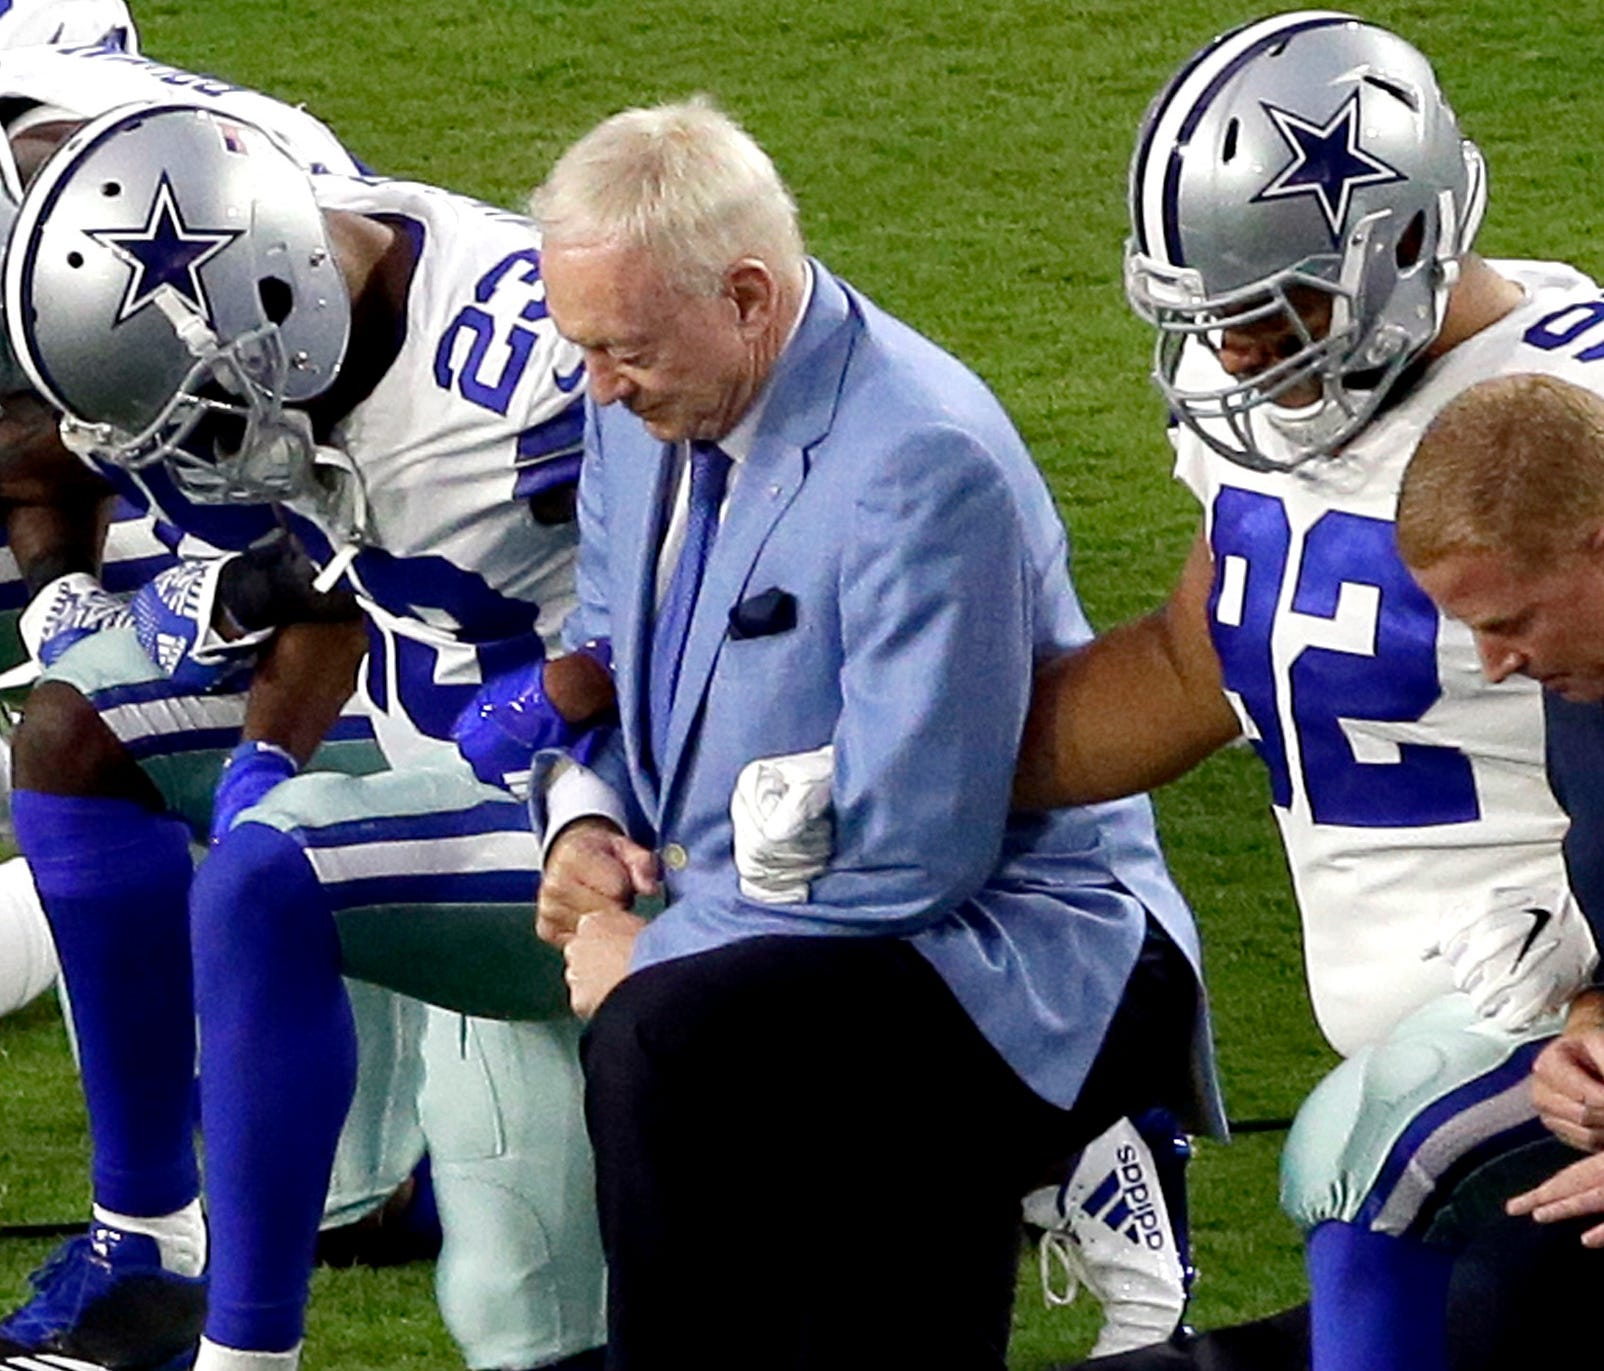 Cowboys owner Jerry Jones has said he will not play anyone who doesn't stand for the anthem.